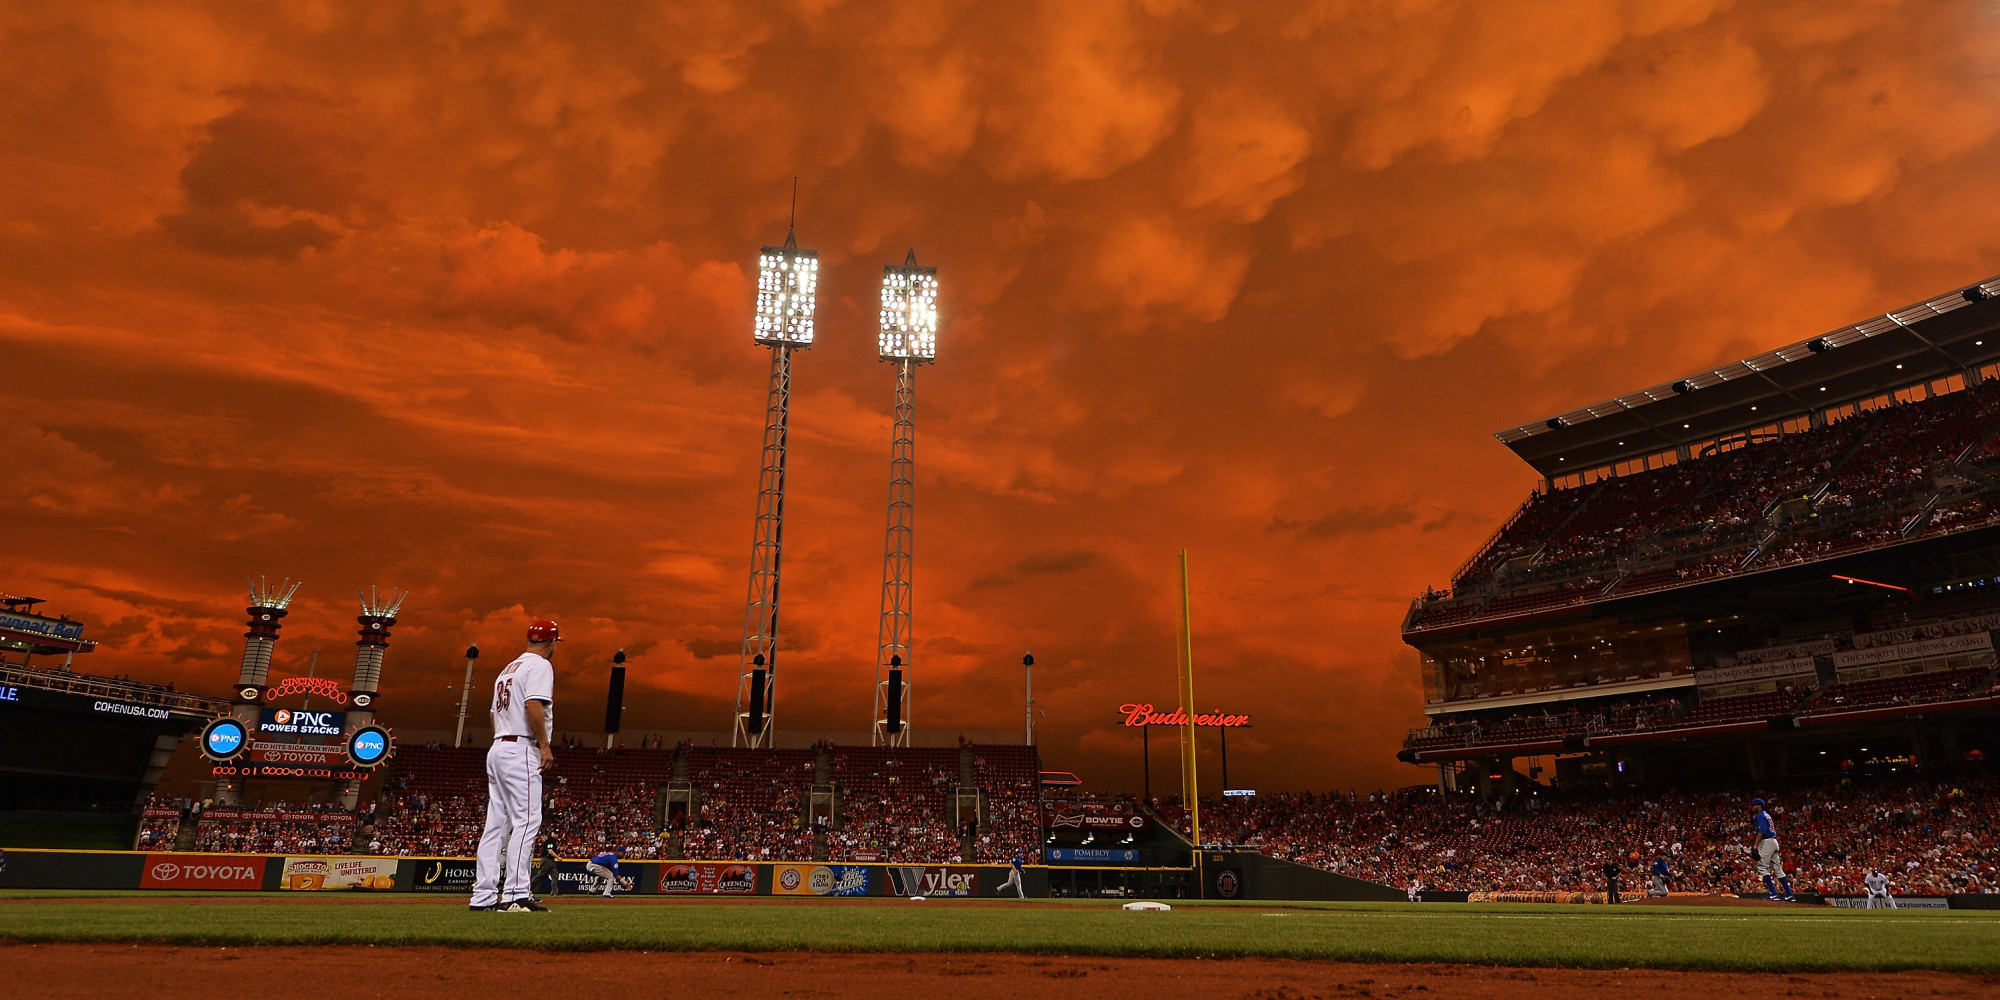 Storm Clouds Hovering Over Reds-Cubs Game Produce Stunning Image ...